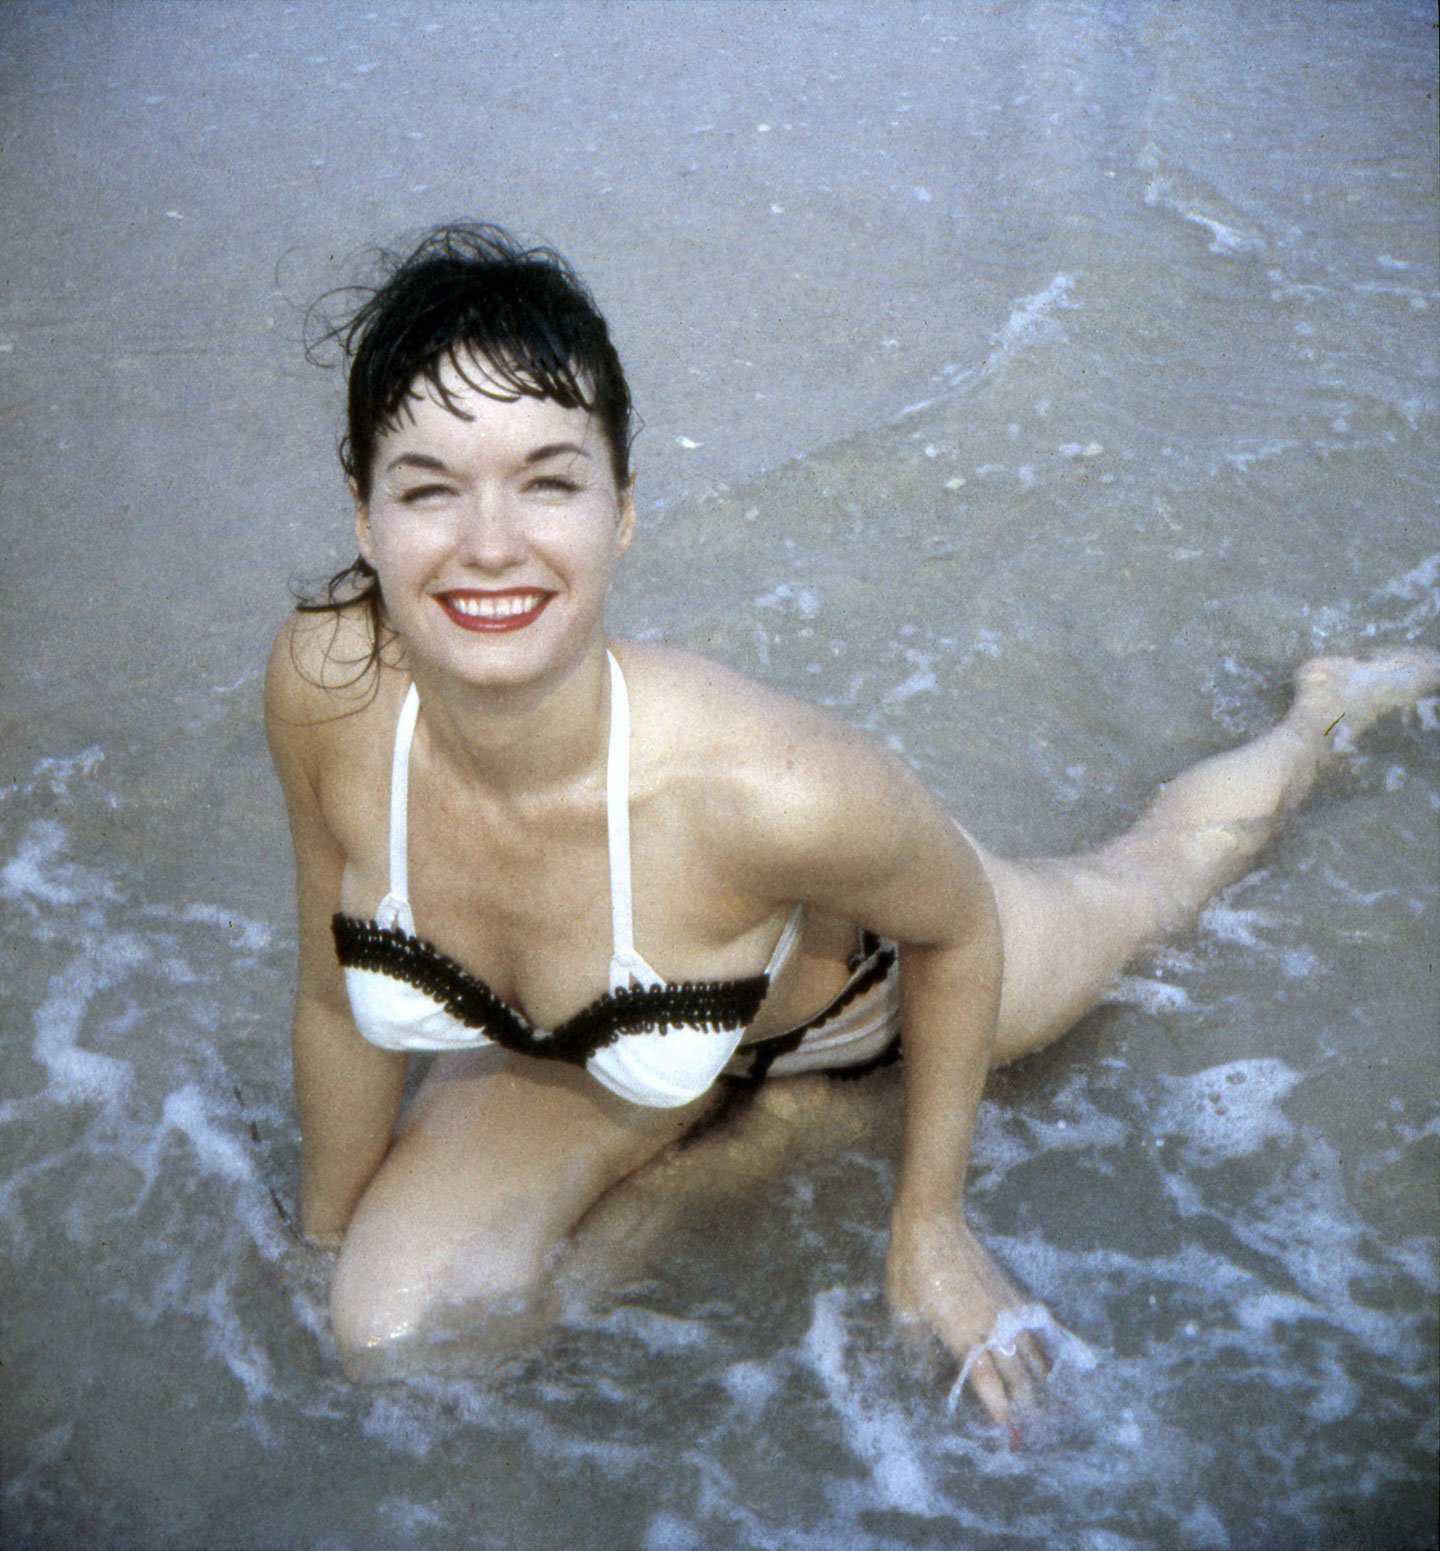 Bettie Page Reveals All - International Films - Independent Films